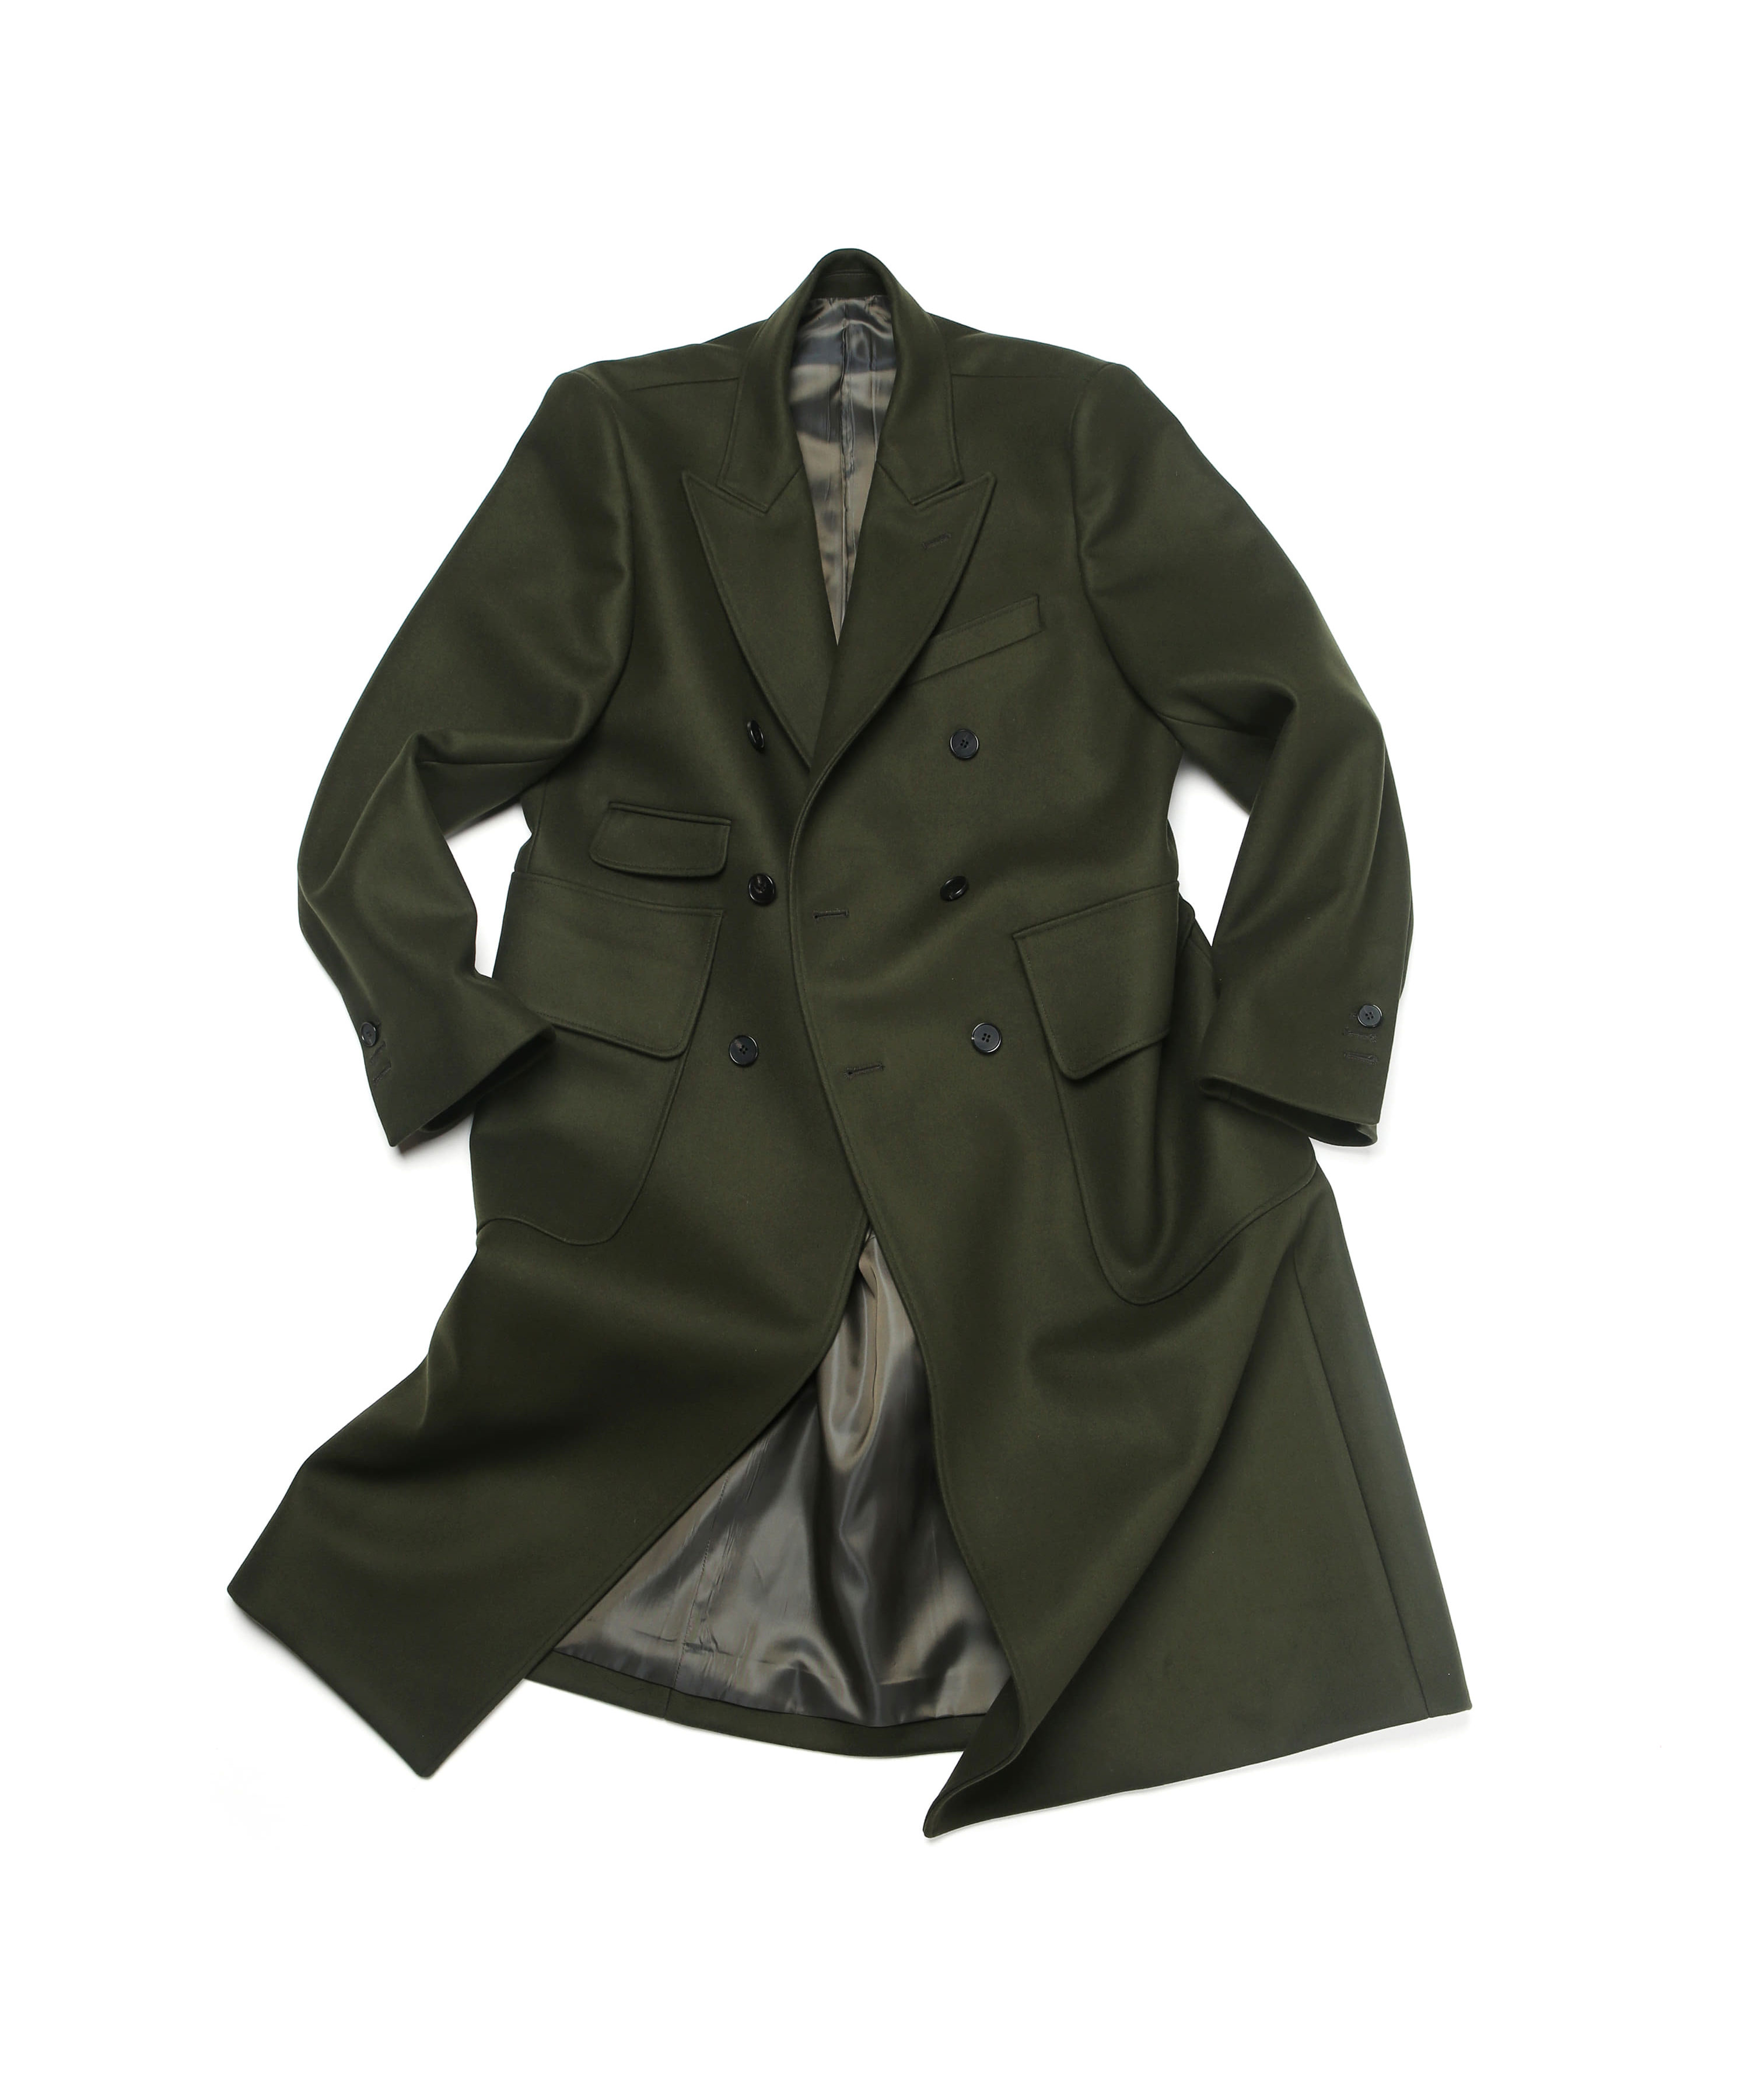 OLIVE DRAB TIMELEAP DOUBLE COAT 01-2